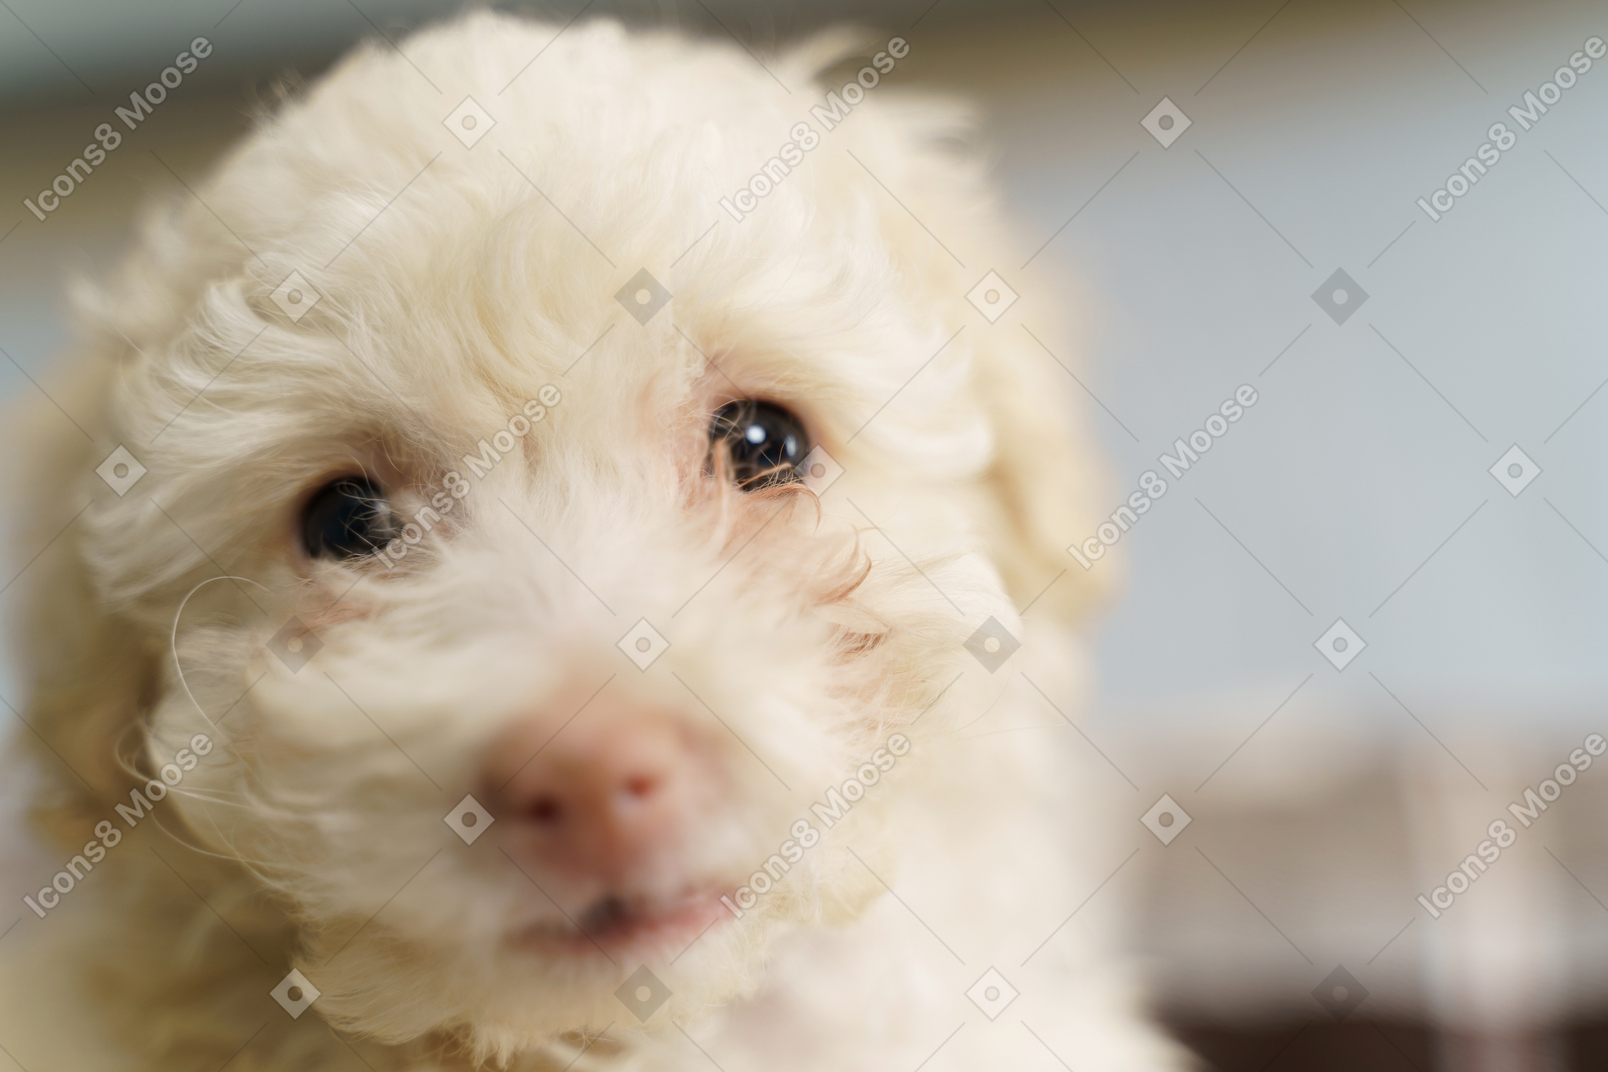 Close-up of a cute poodle looking at camera